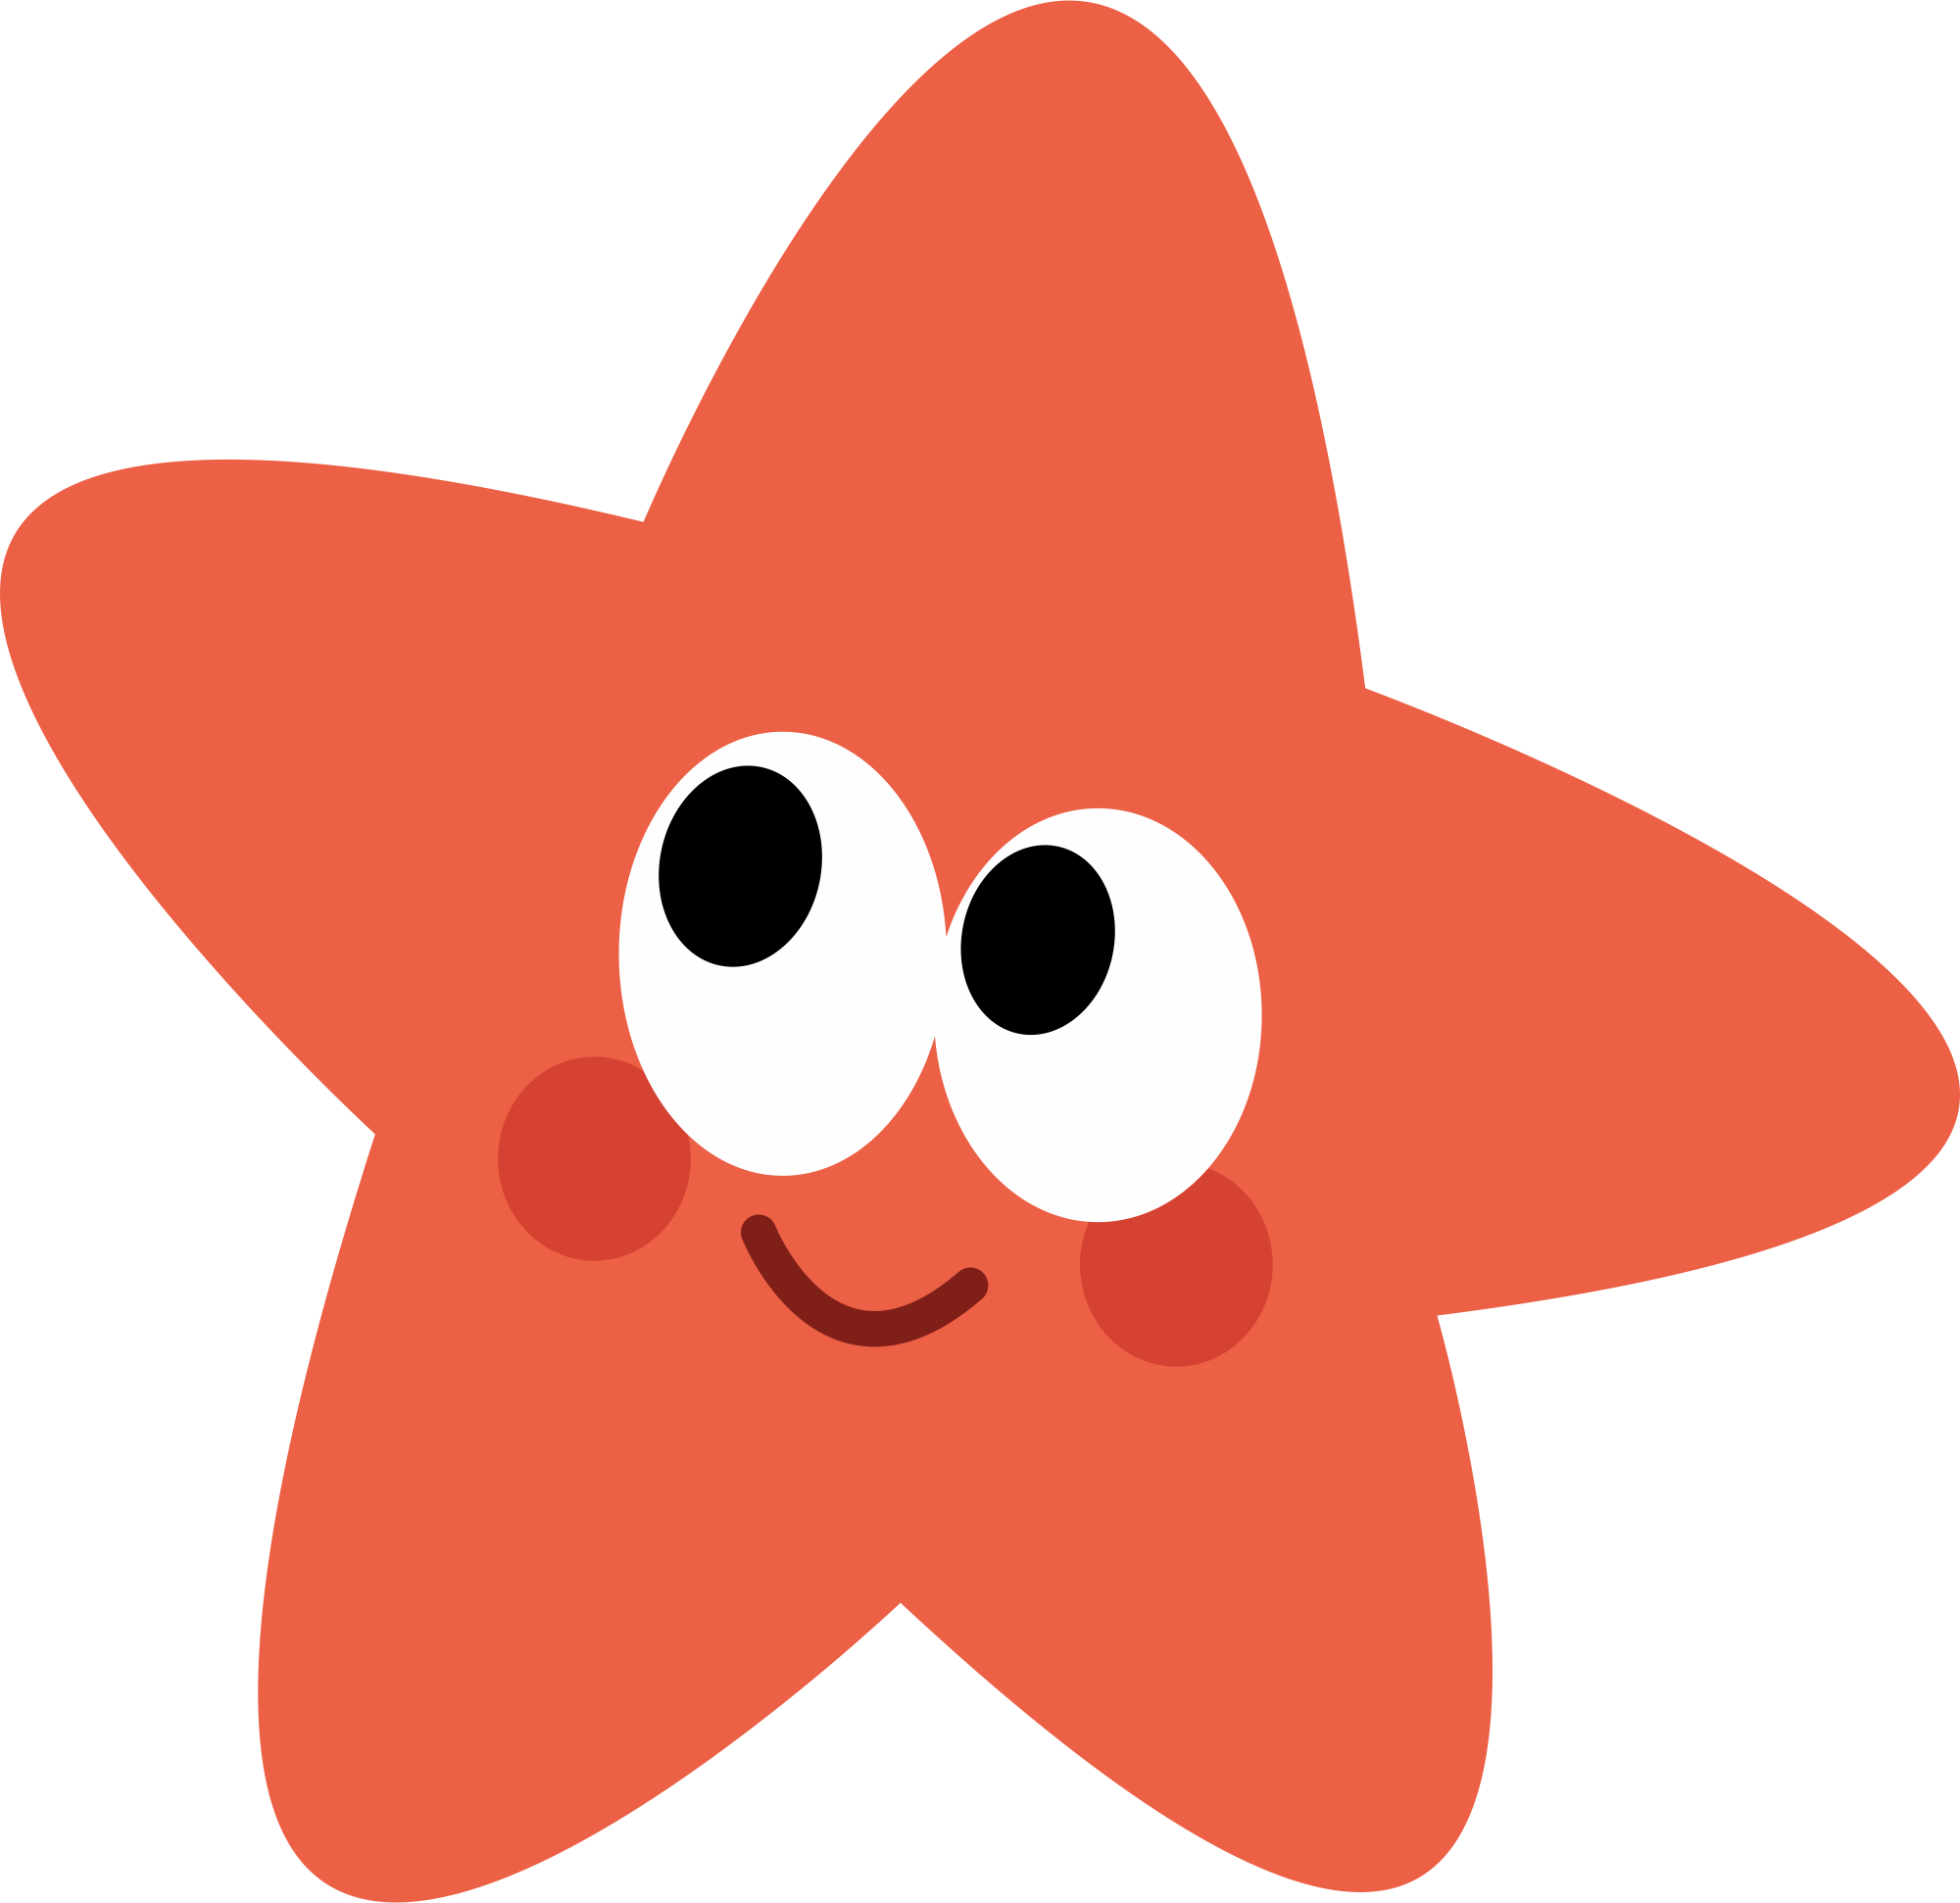 A Cartoon Star With Eyes And Mouth